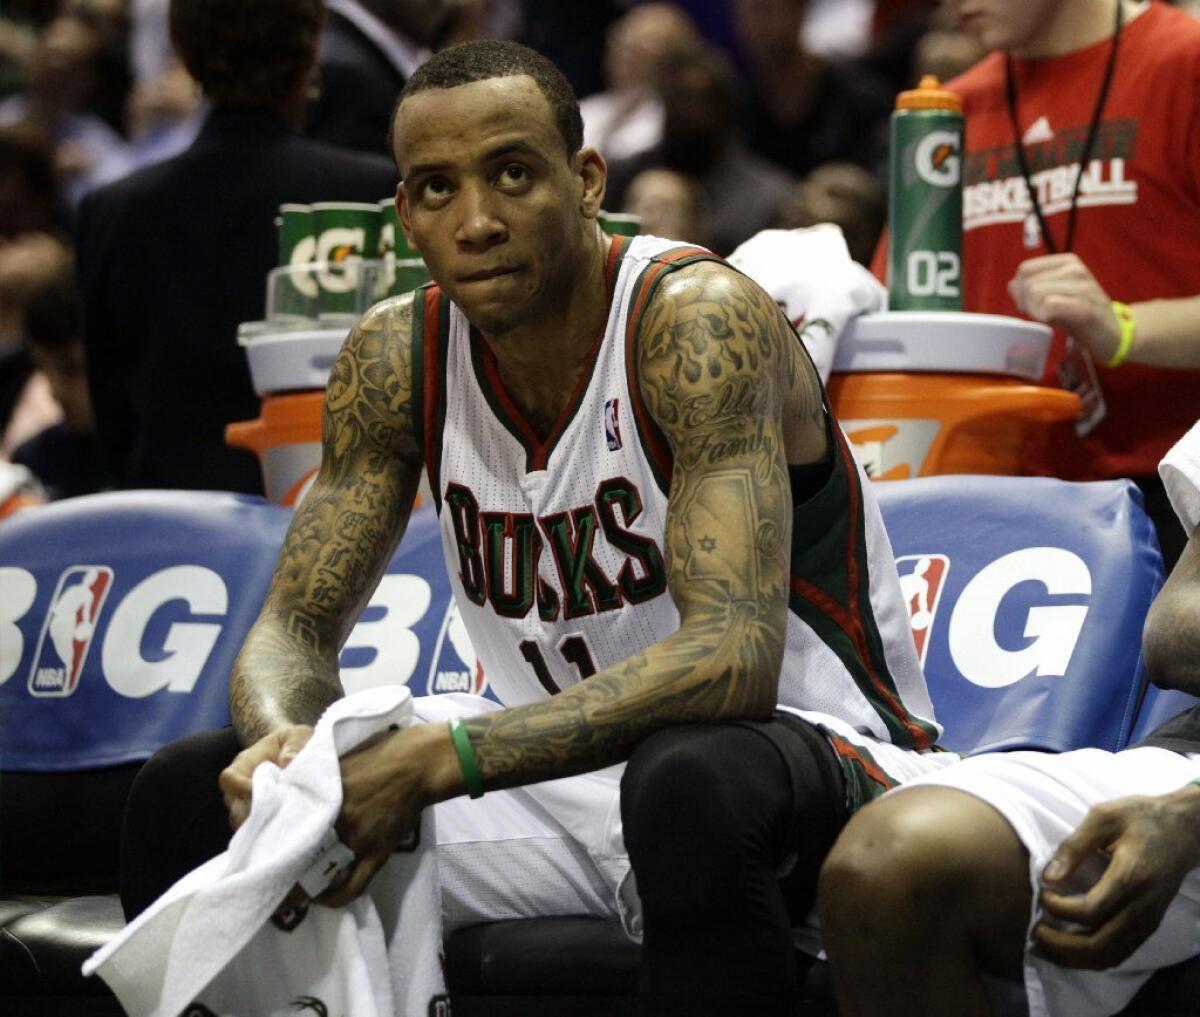 Don't count on players such as Monta Ellis competing for the Lakers next season.